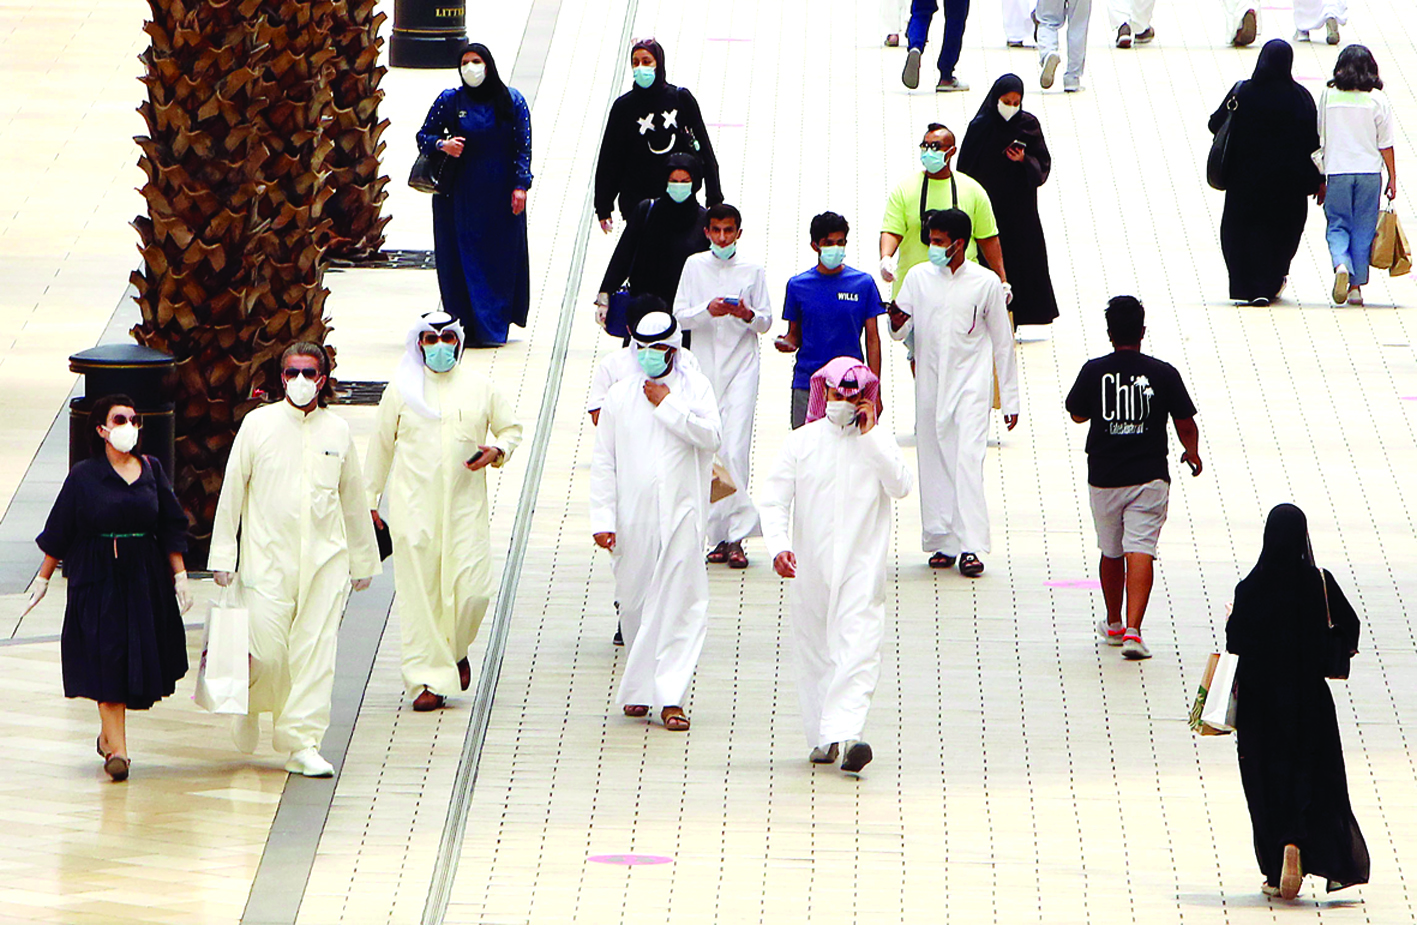 Kuwaitis wearing face masks walk inside the re-opened Avenues Mall, the country's largest shopping centre, on June 30, 2020 in Kuwait City after almost a four-months shutdown to prevent the spread of the coronavirus Covid-19 in the country. (Photo by YASSER AL-ZAYYAT / AFP)